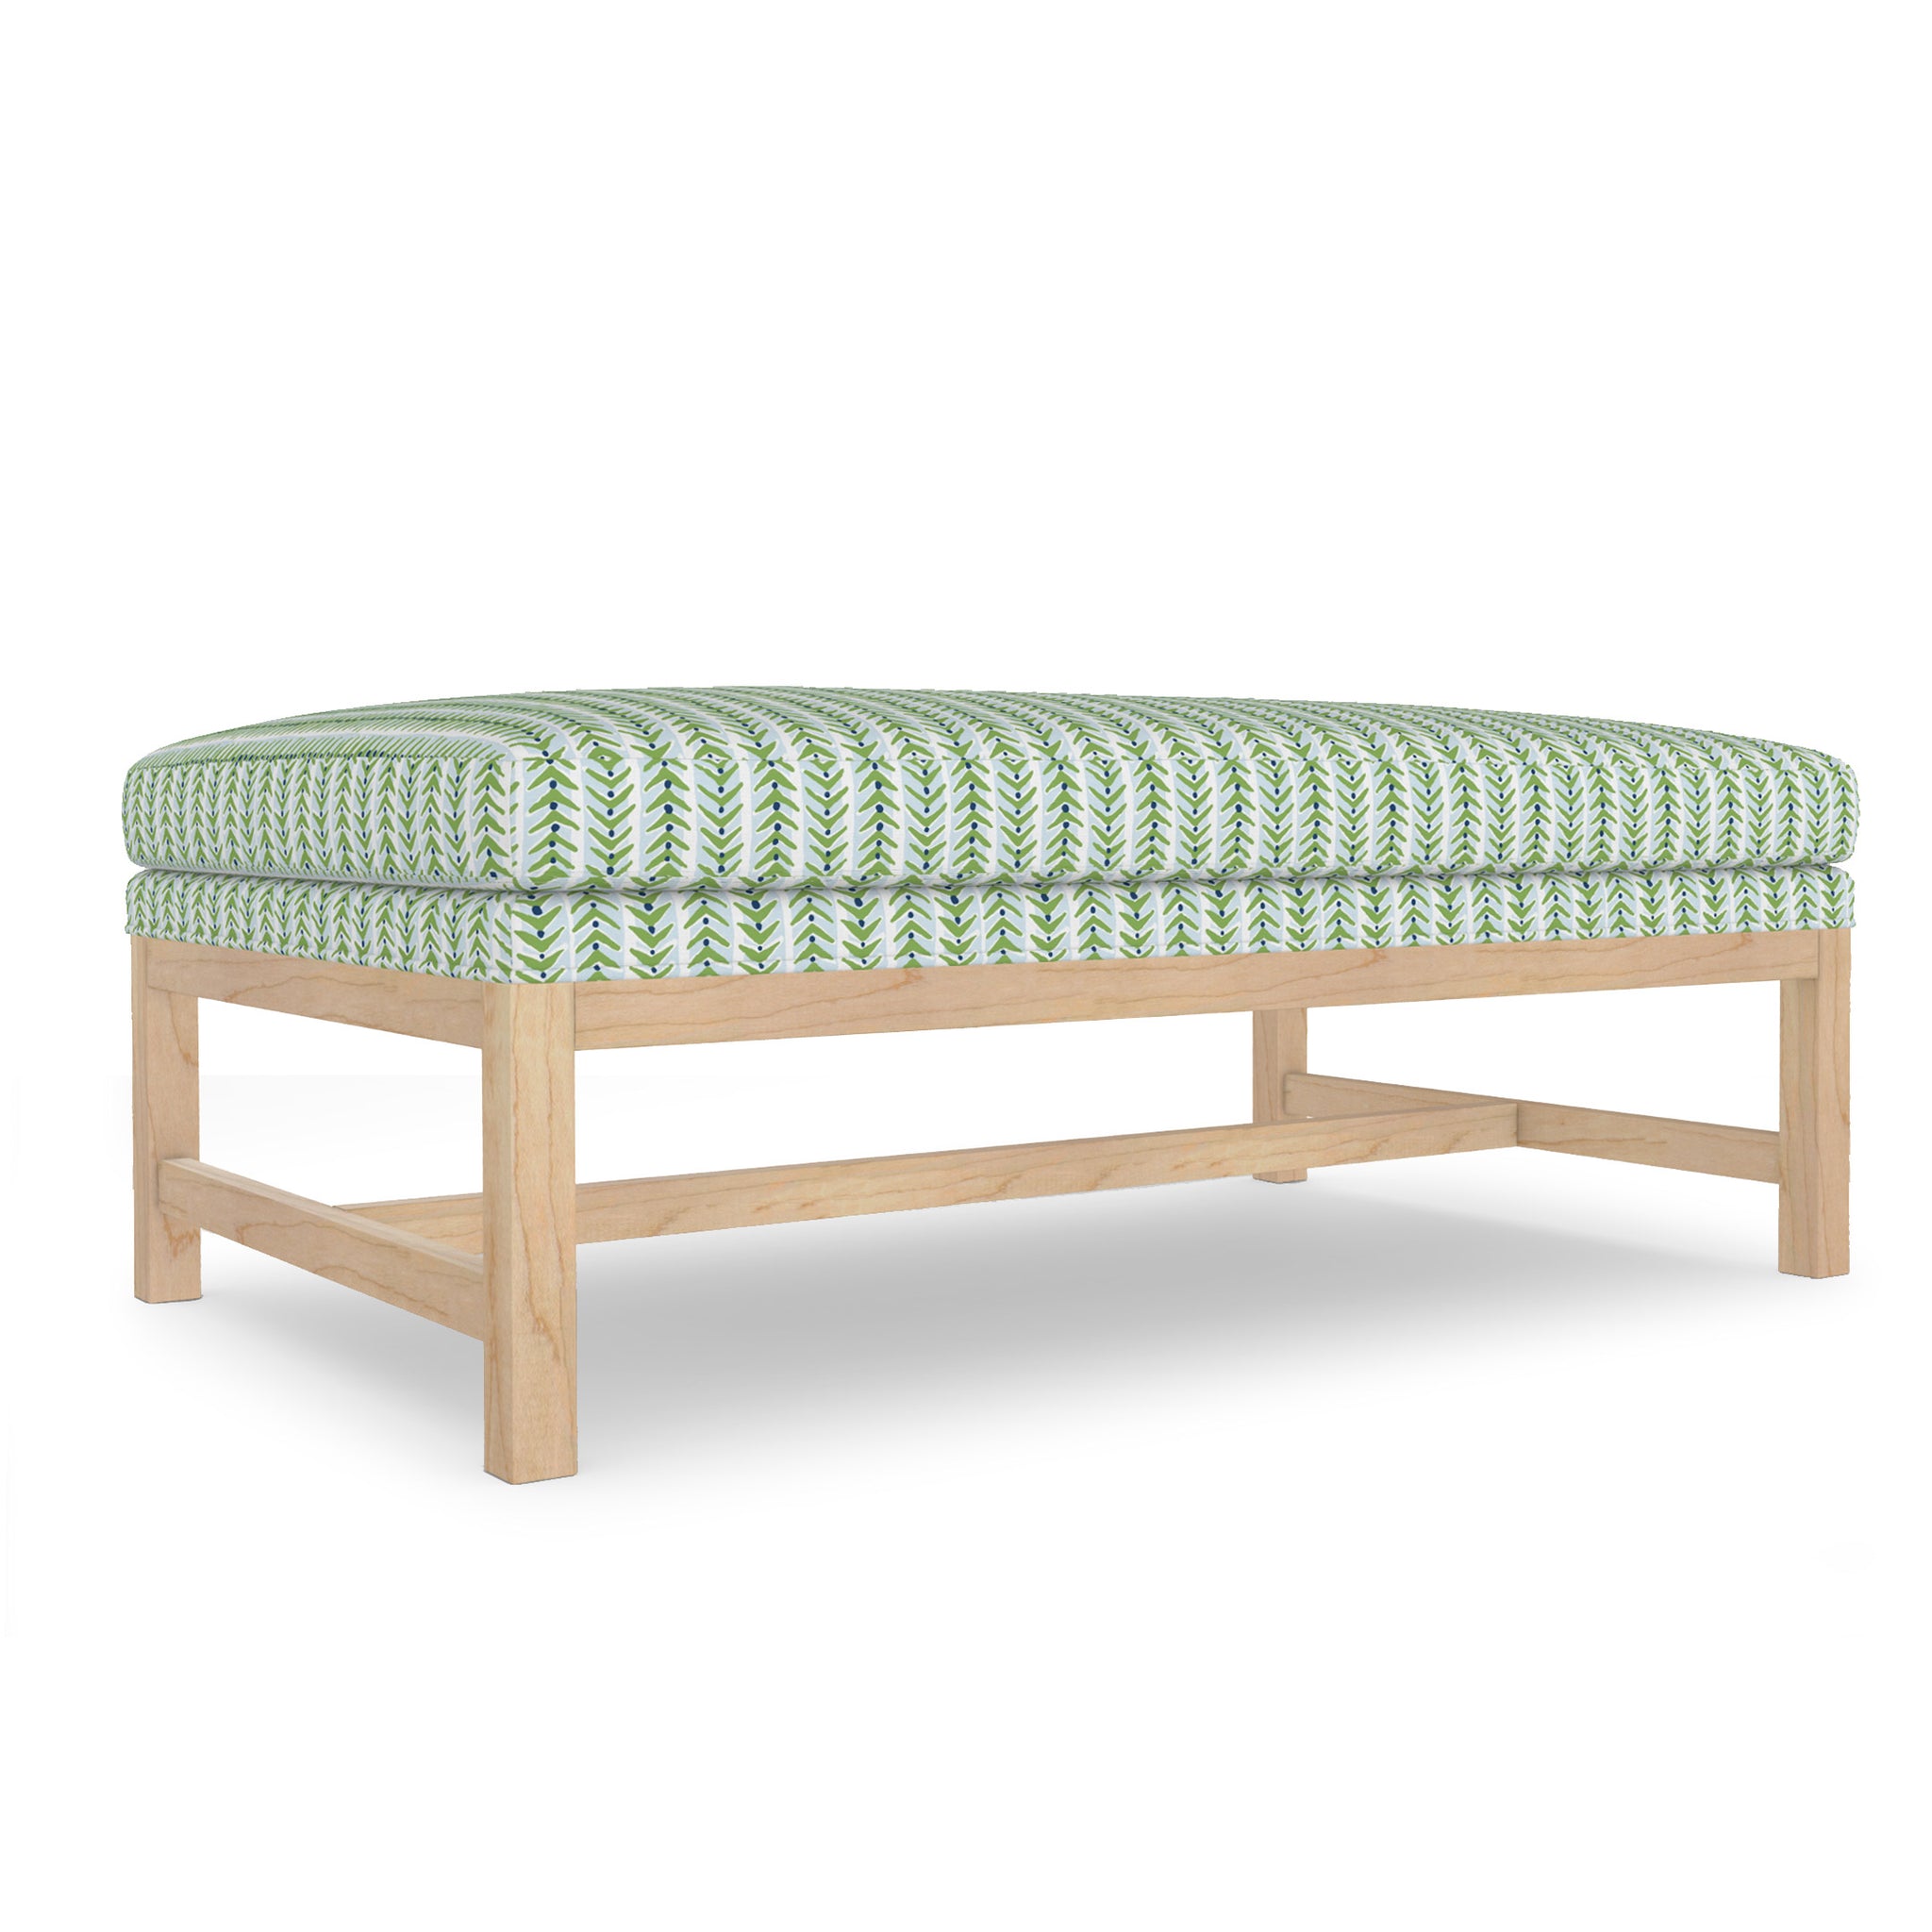 Maine Cottage Shelby Bench  | Upholstered Benches | Maine Cottage® 